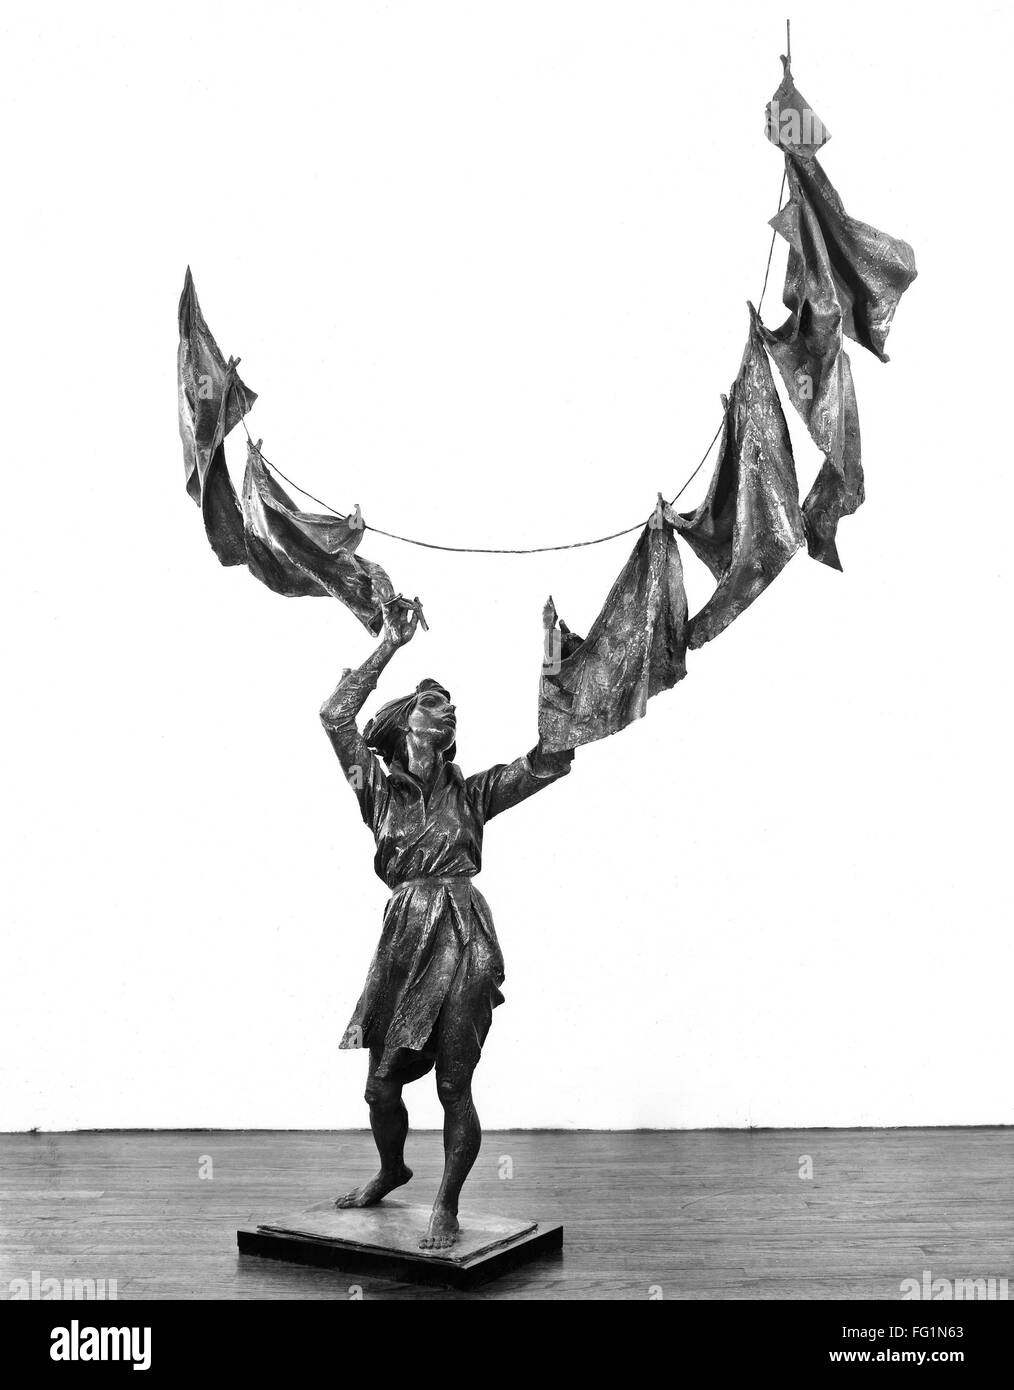 LUCCHESI: SCULPTURE, 1967. /n'Woman Hanging Clothes.' Bronze sculpture by Bruno  Lucchesi, 1967. Height: 81 inches. EDITORIAL USE ONLY Stock Photo - Alamy